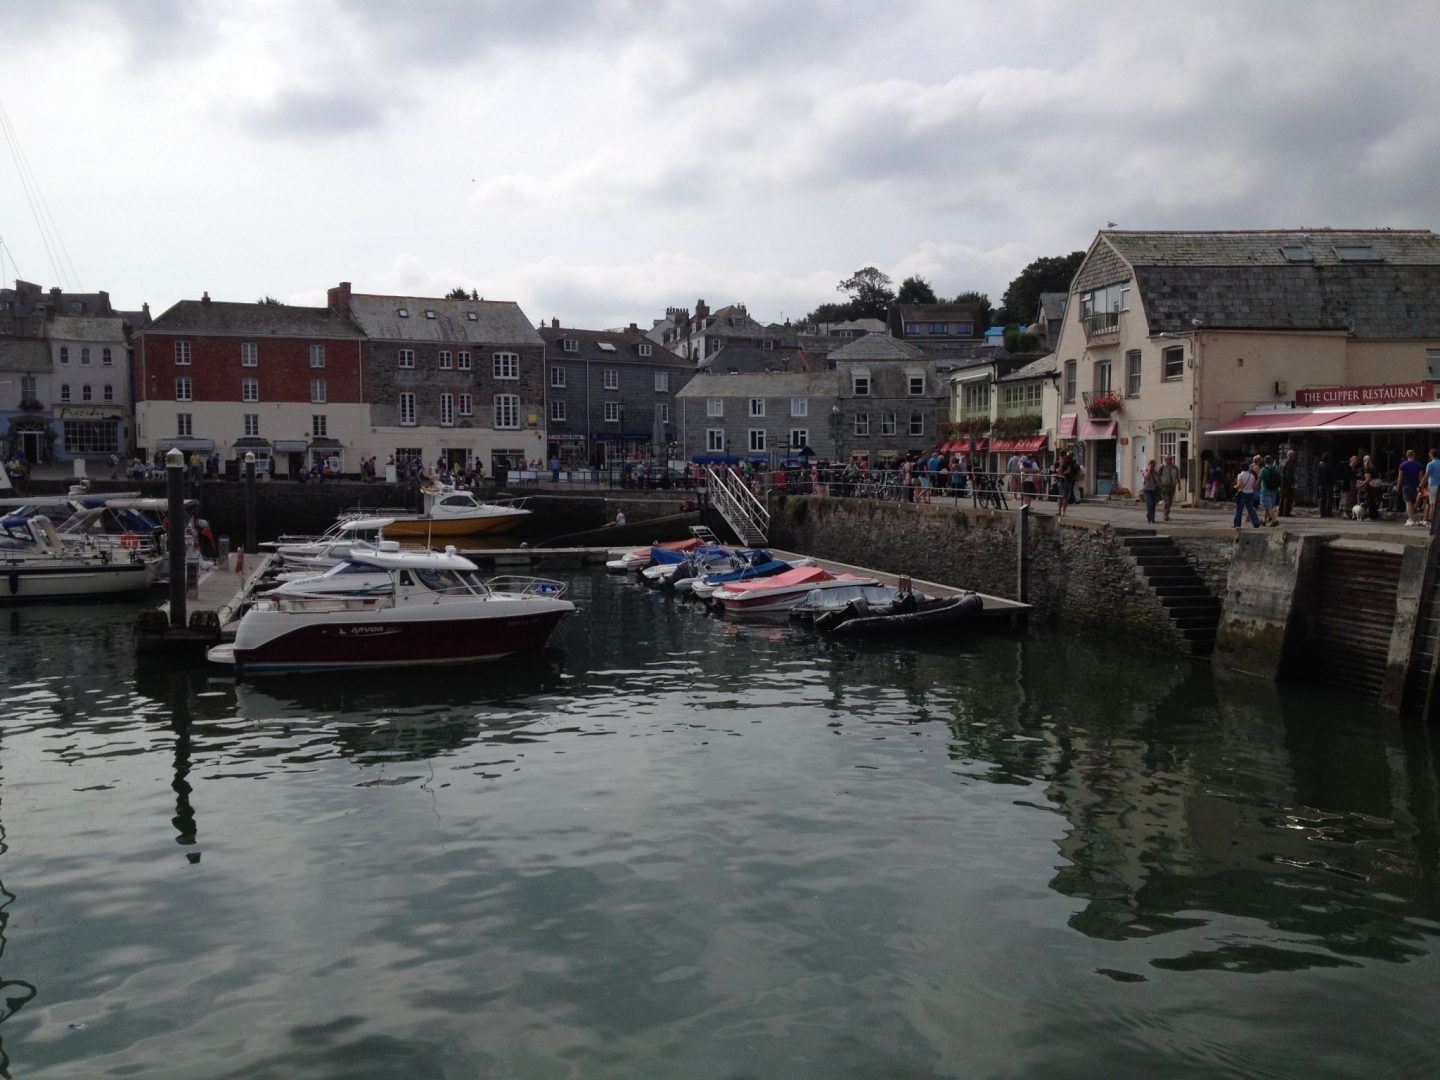 Harbour at Padstow, Cornwall